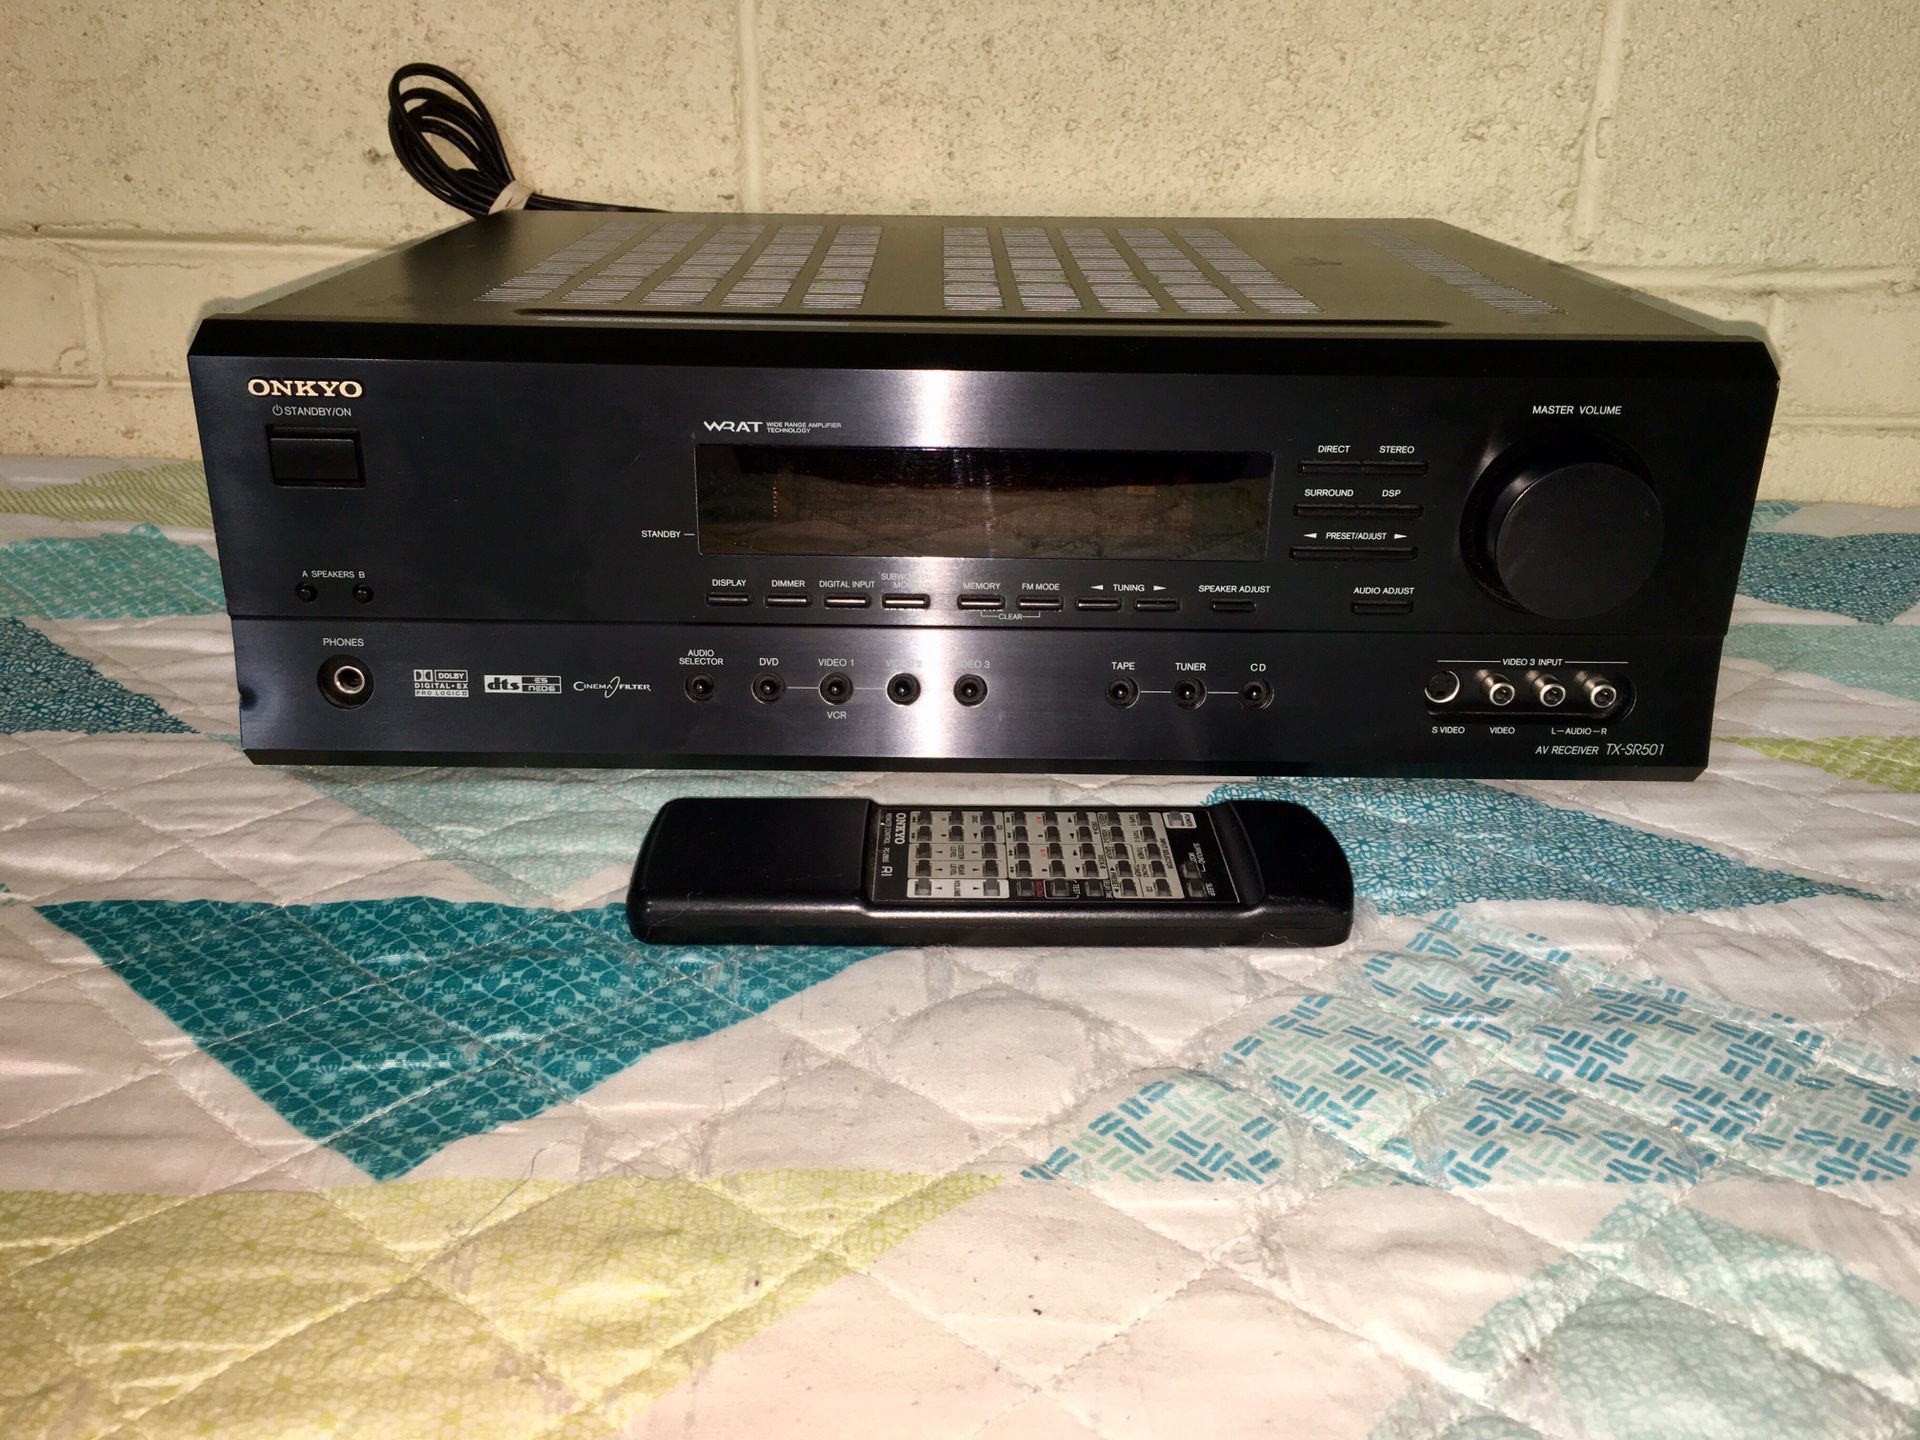 Onkyo TX-SR501 6.1-Channel Home Theater Receiver with remote control pick up skokie IL